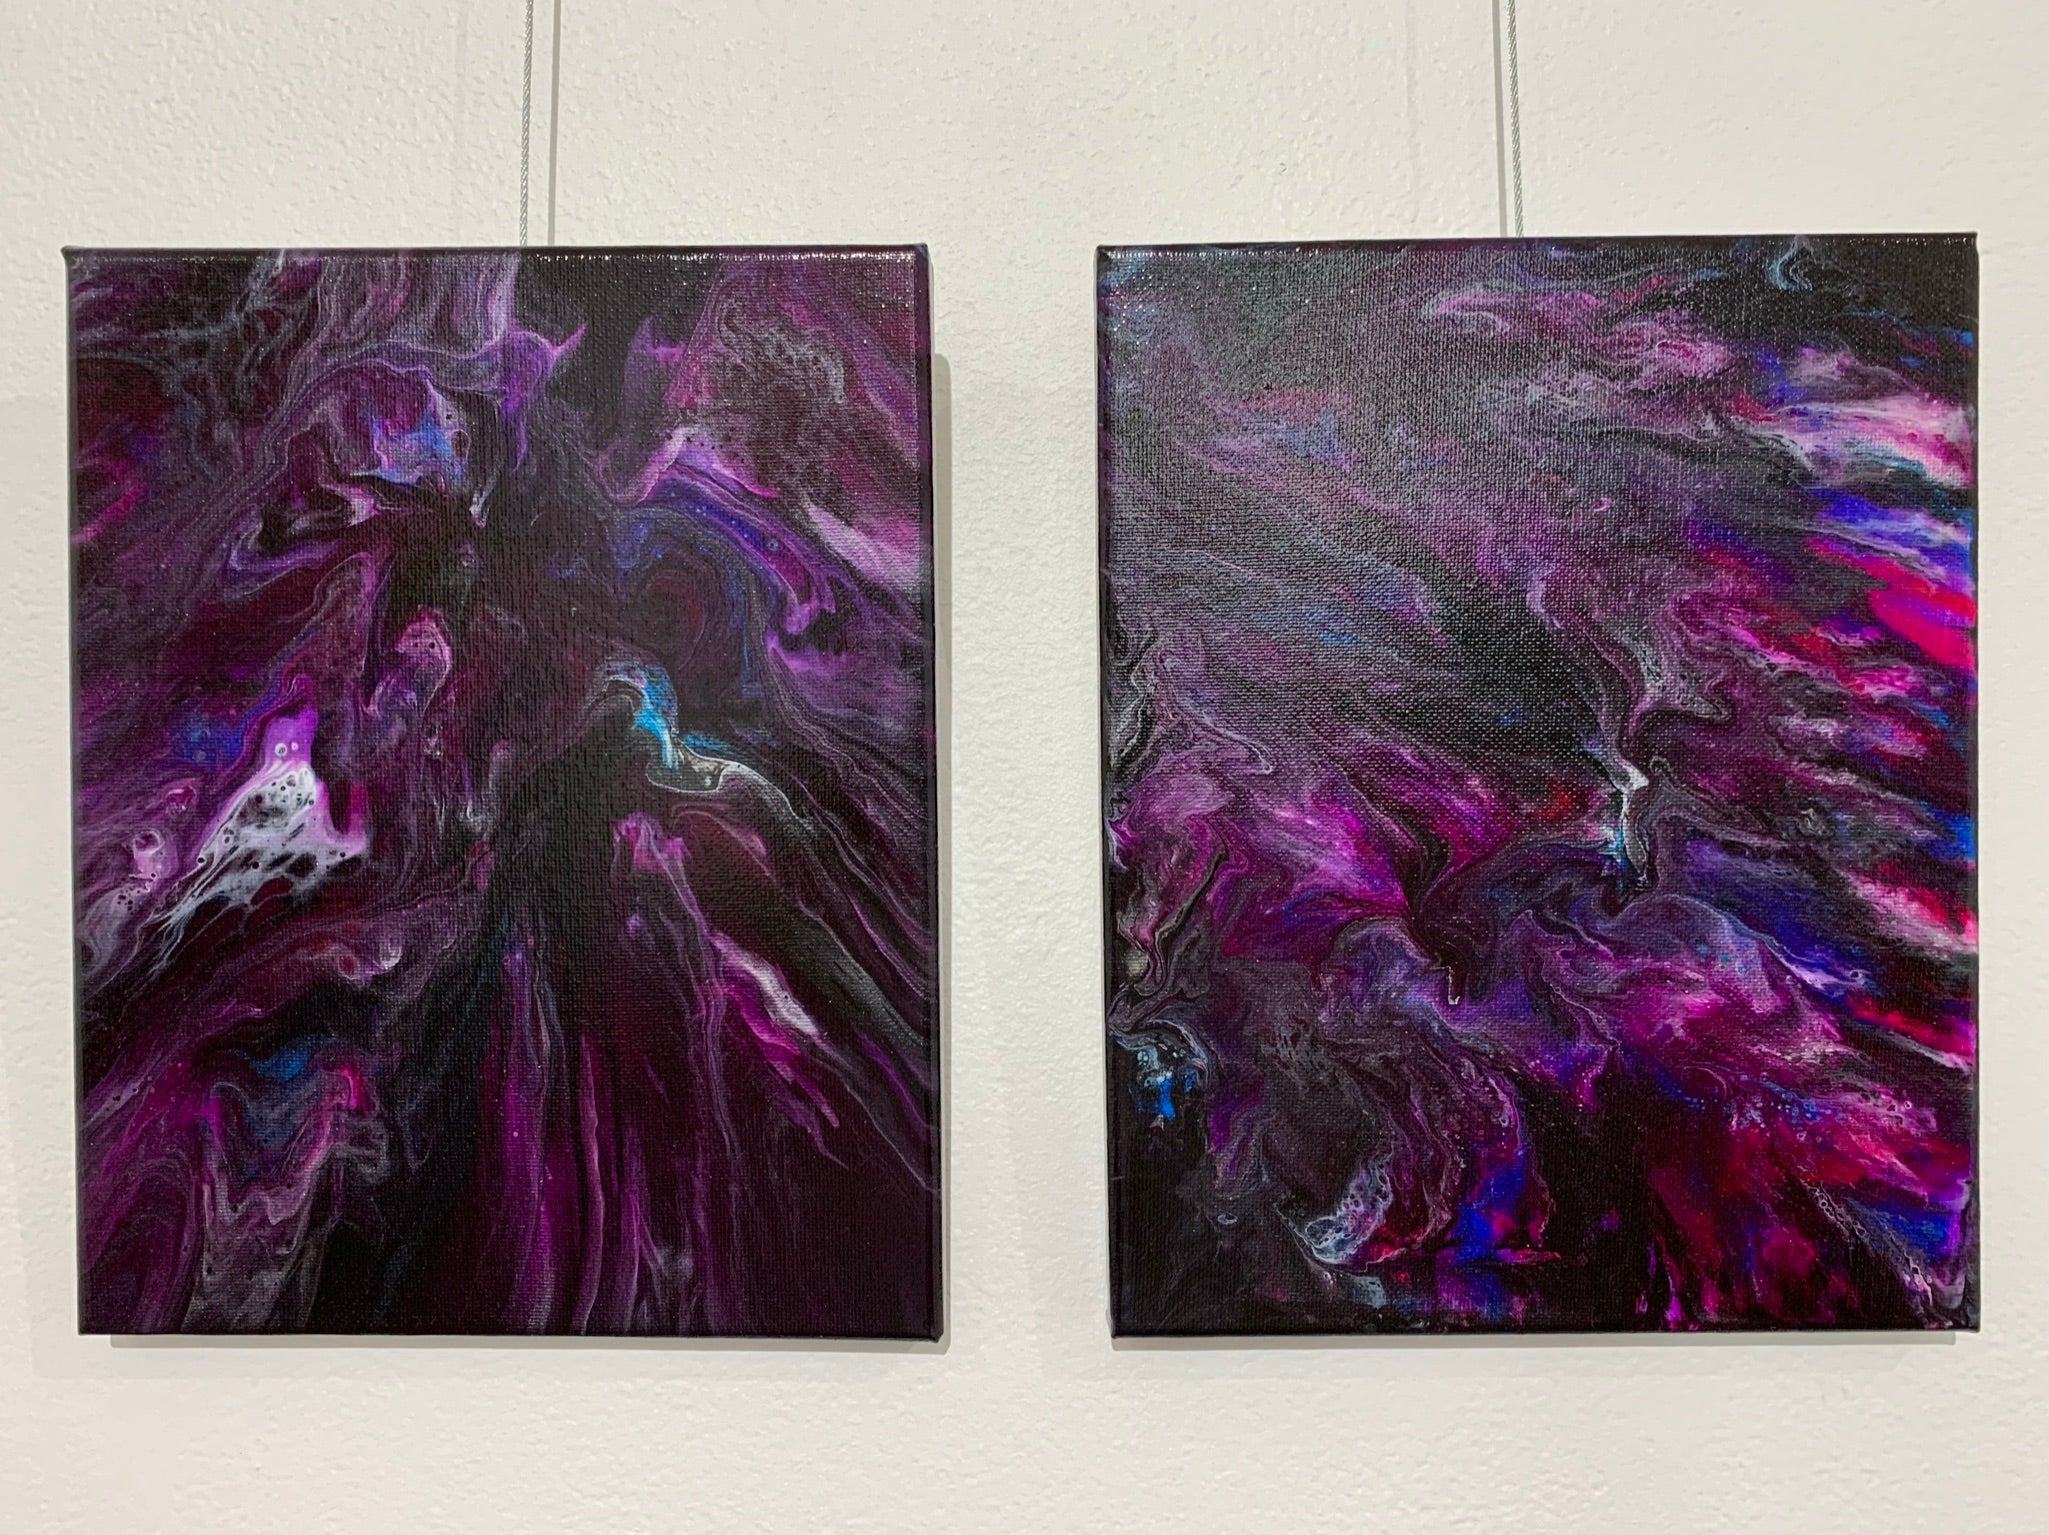 Artwork - Answers Lie Within & Hope's Hurricane - (Diptych) 8x10/8x10